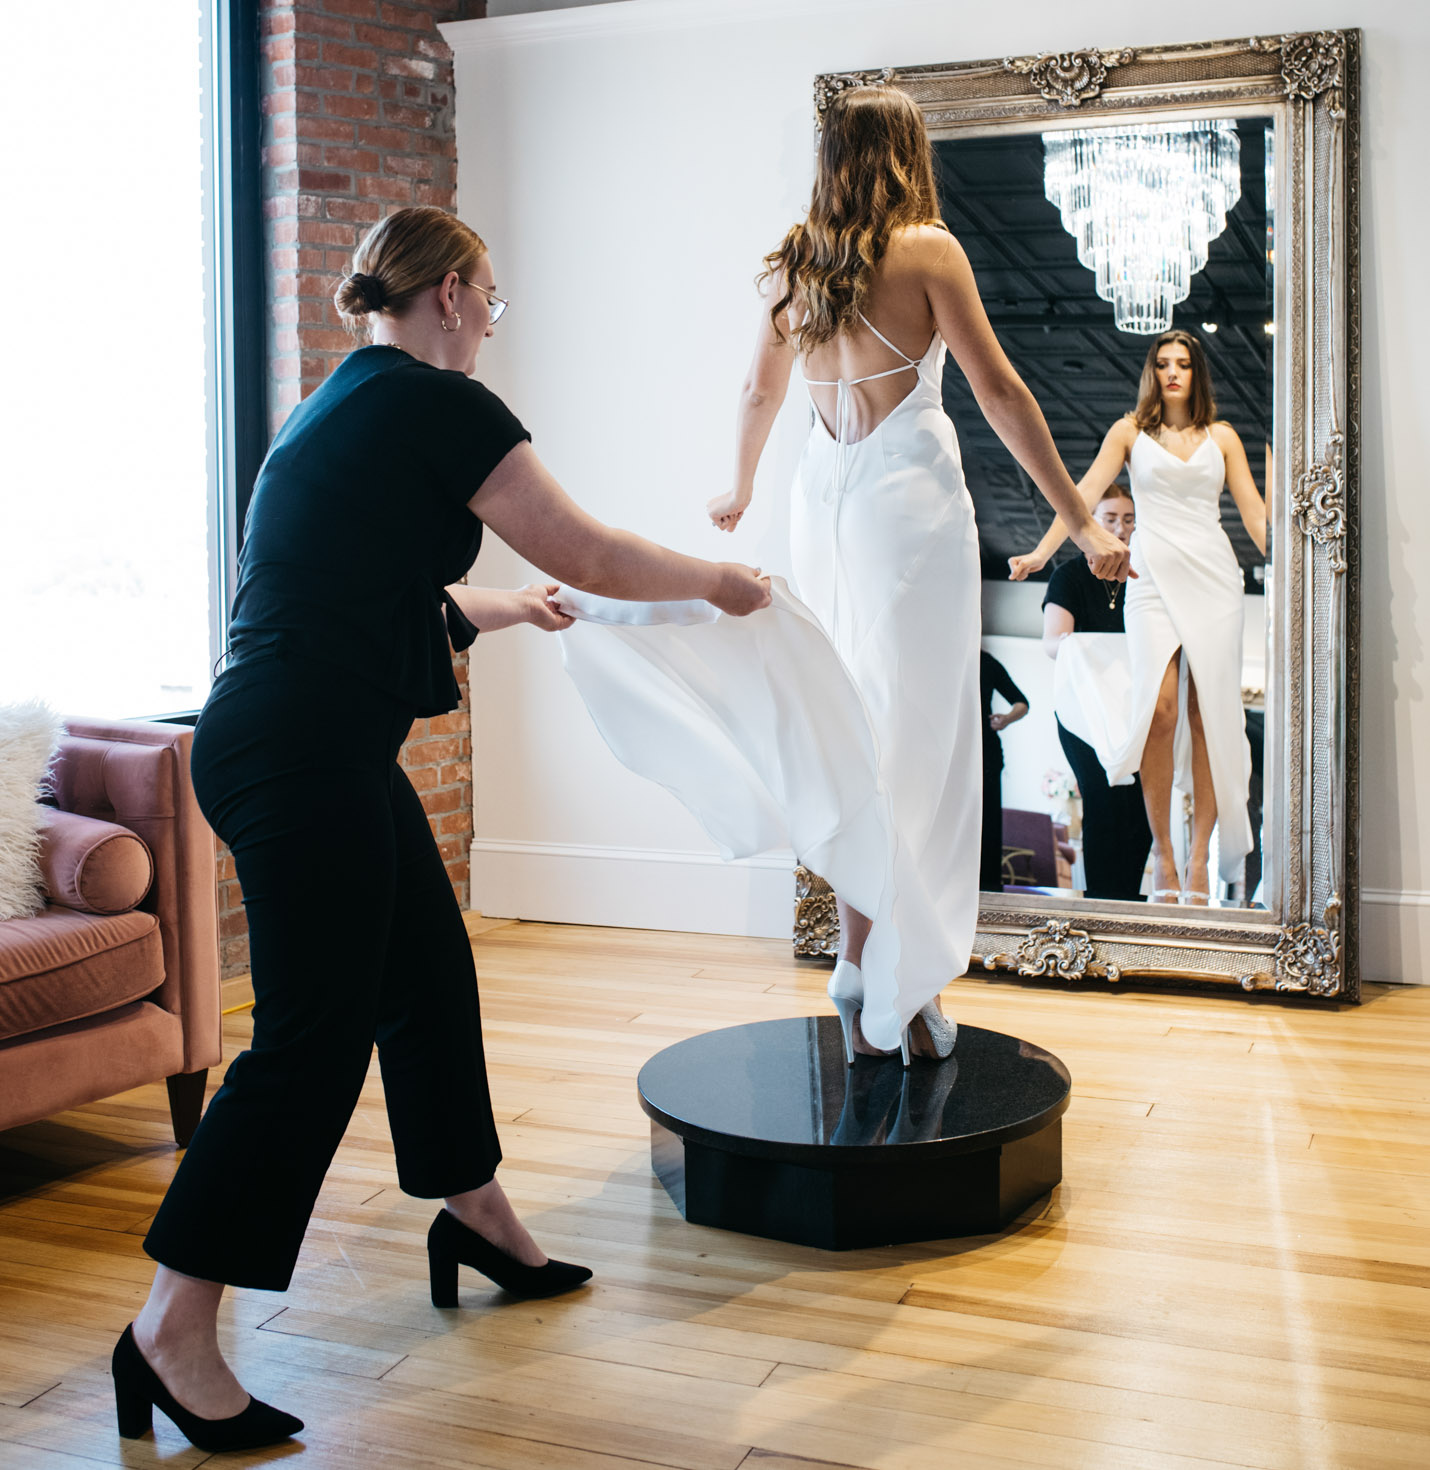 A store assistant helping a bride try on a dress.